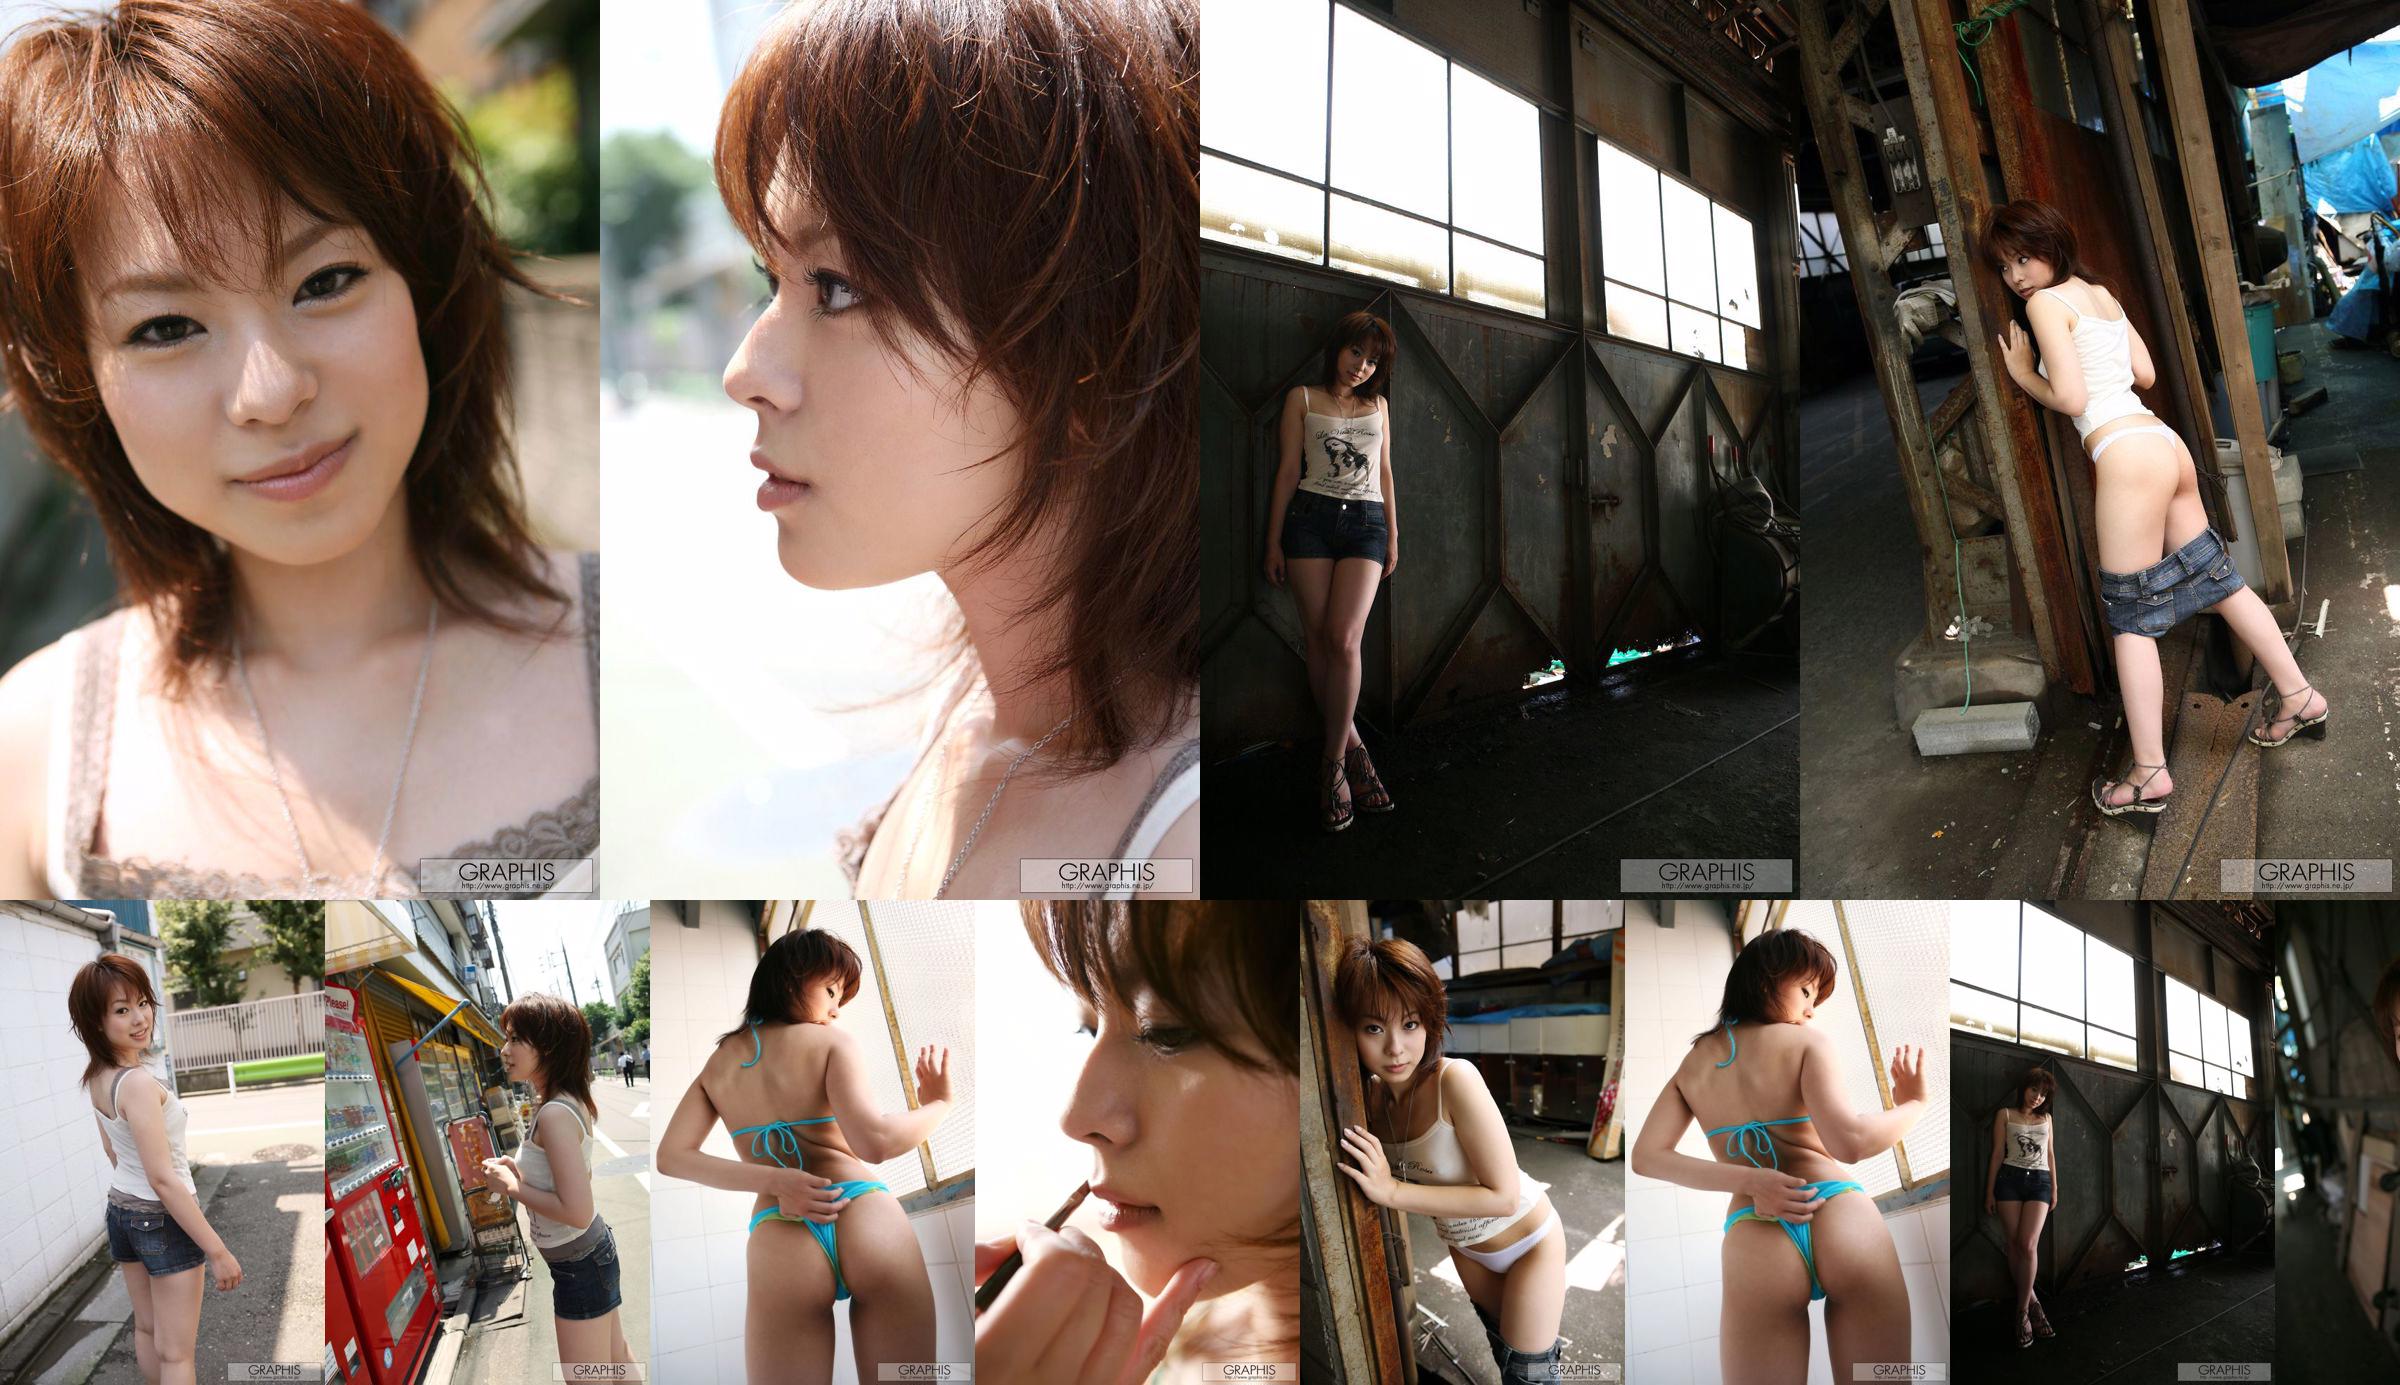 Mina Manabe Mina Manabe [Graphis] First Gravure First Take Off Con gái No.f619b9 Trang 1